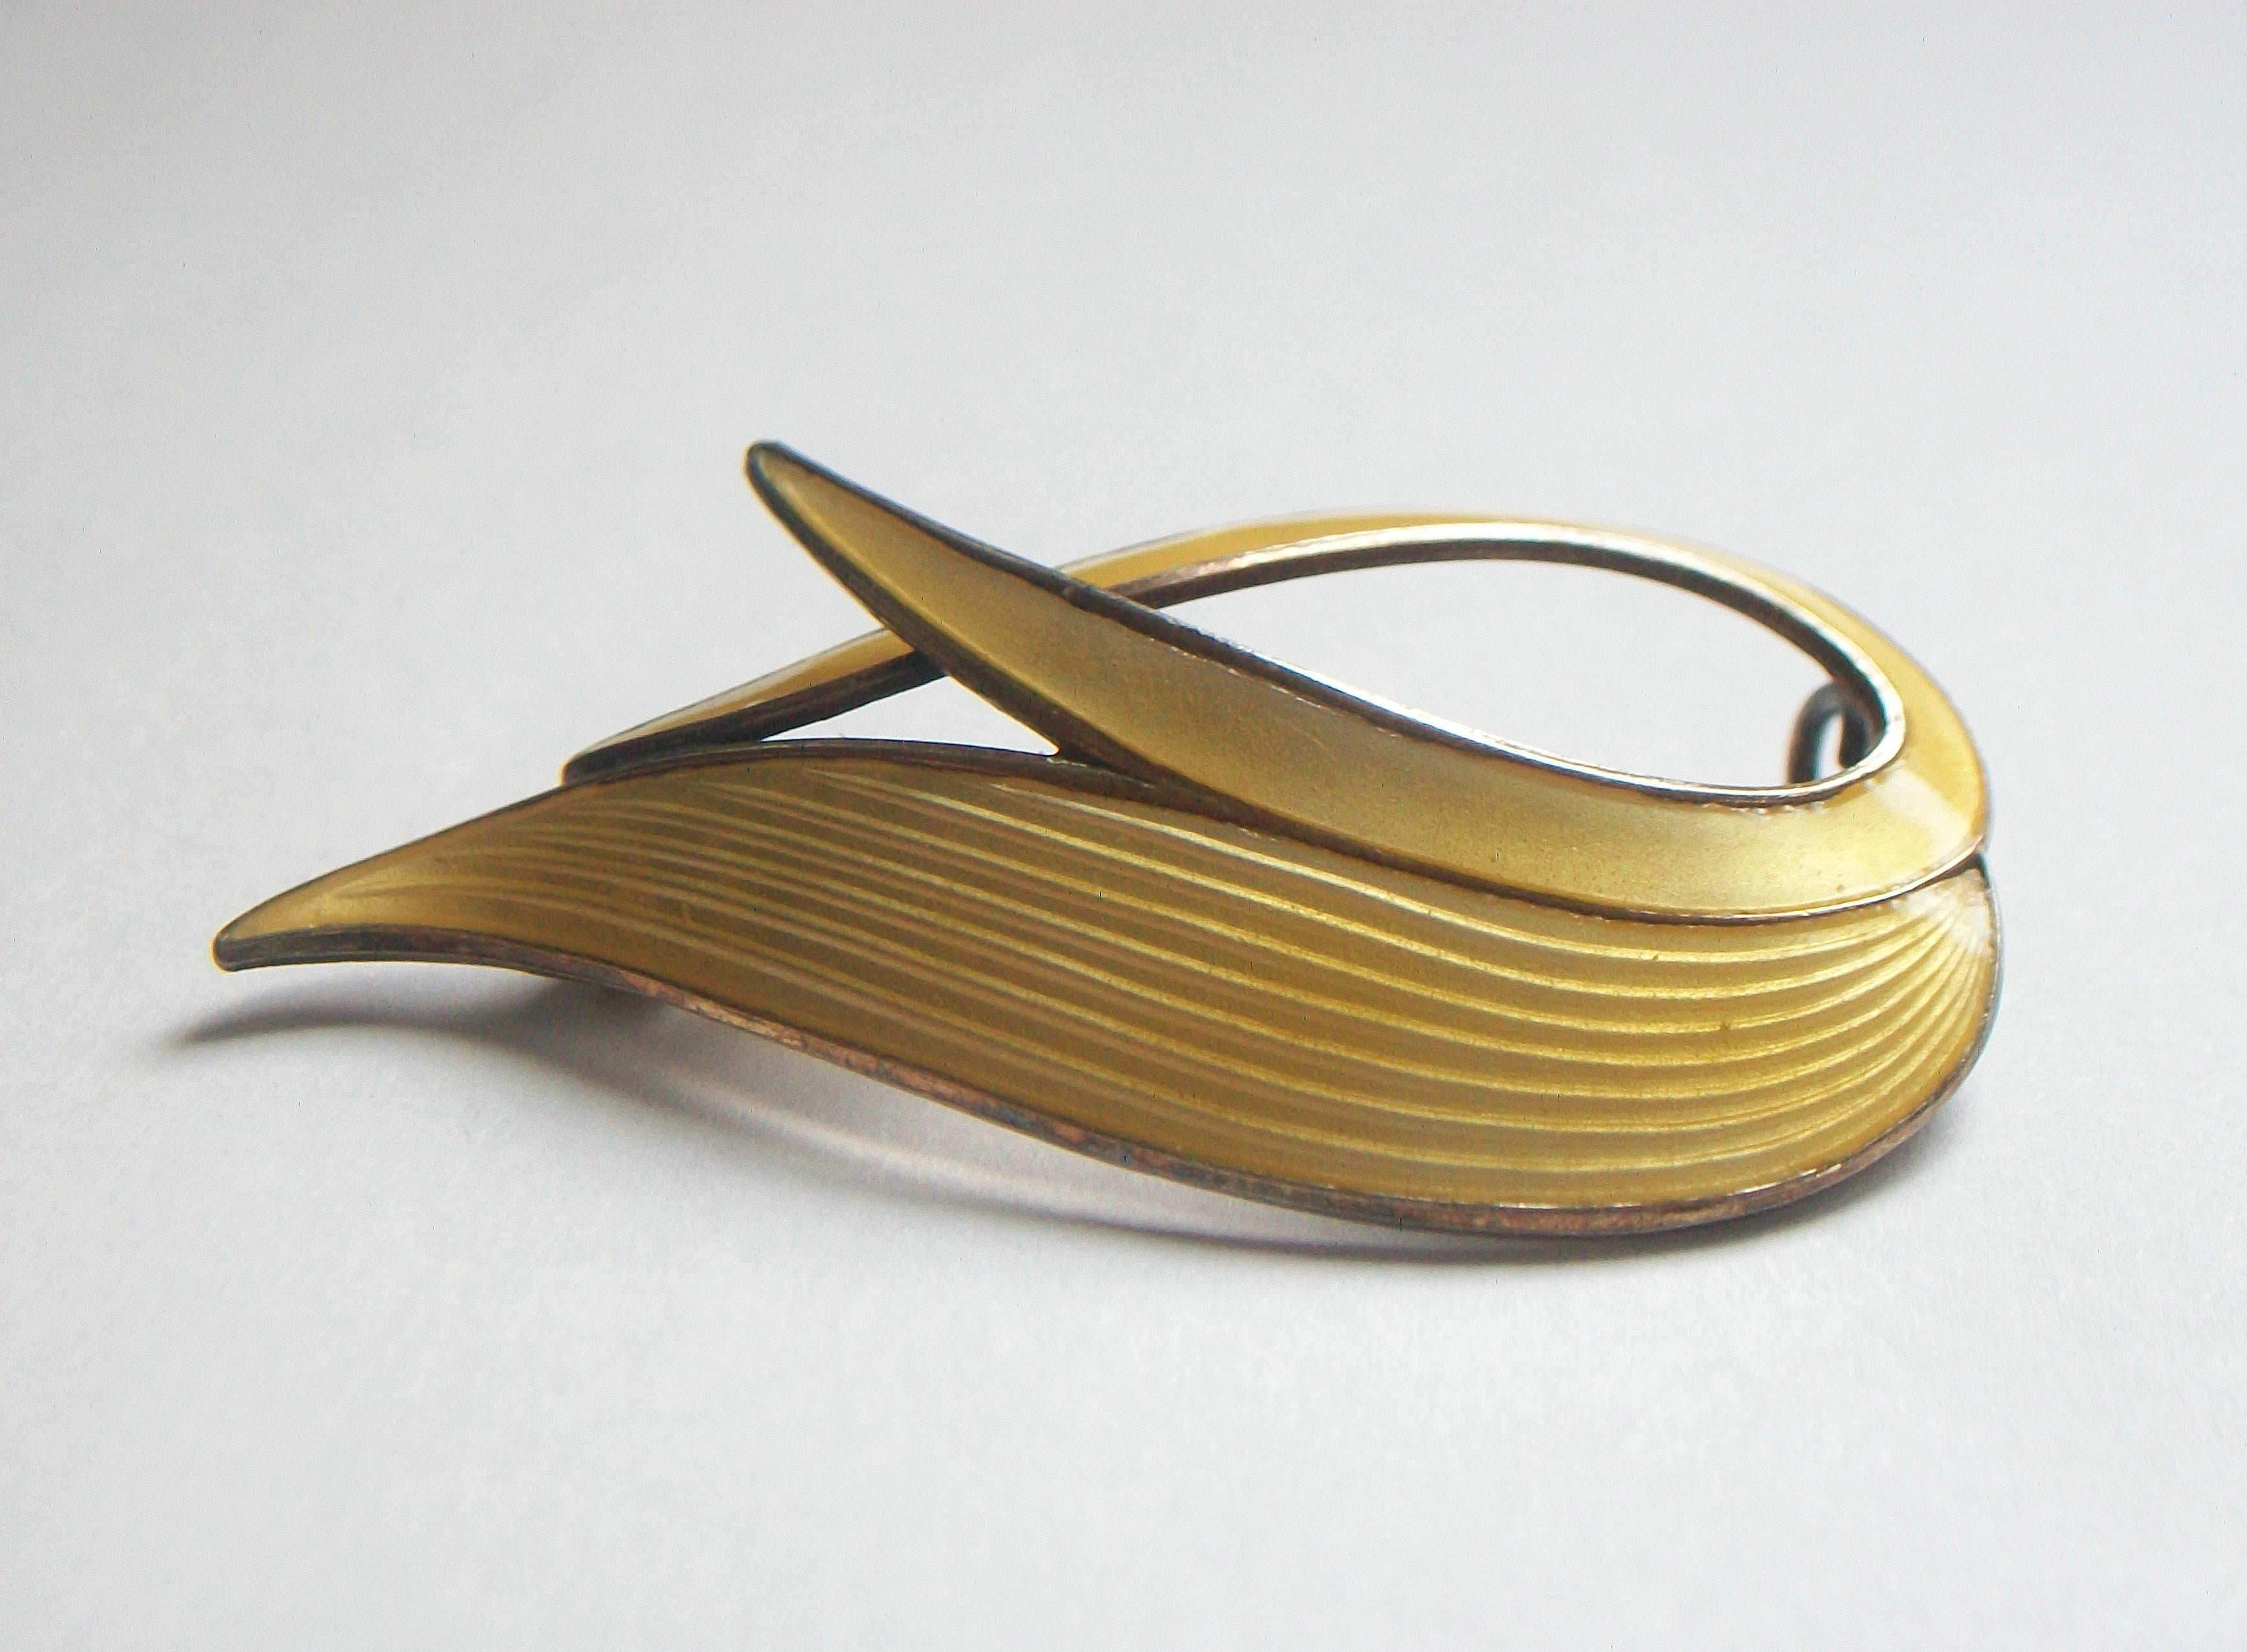 Modernist ALBERT SCHARNING - Guilloché Enamel & Sterling Silver Pin - Norway - Mid 20th C. For Sale